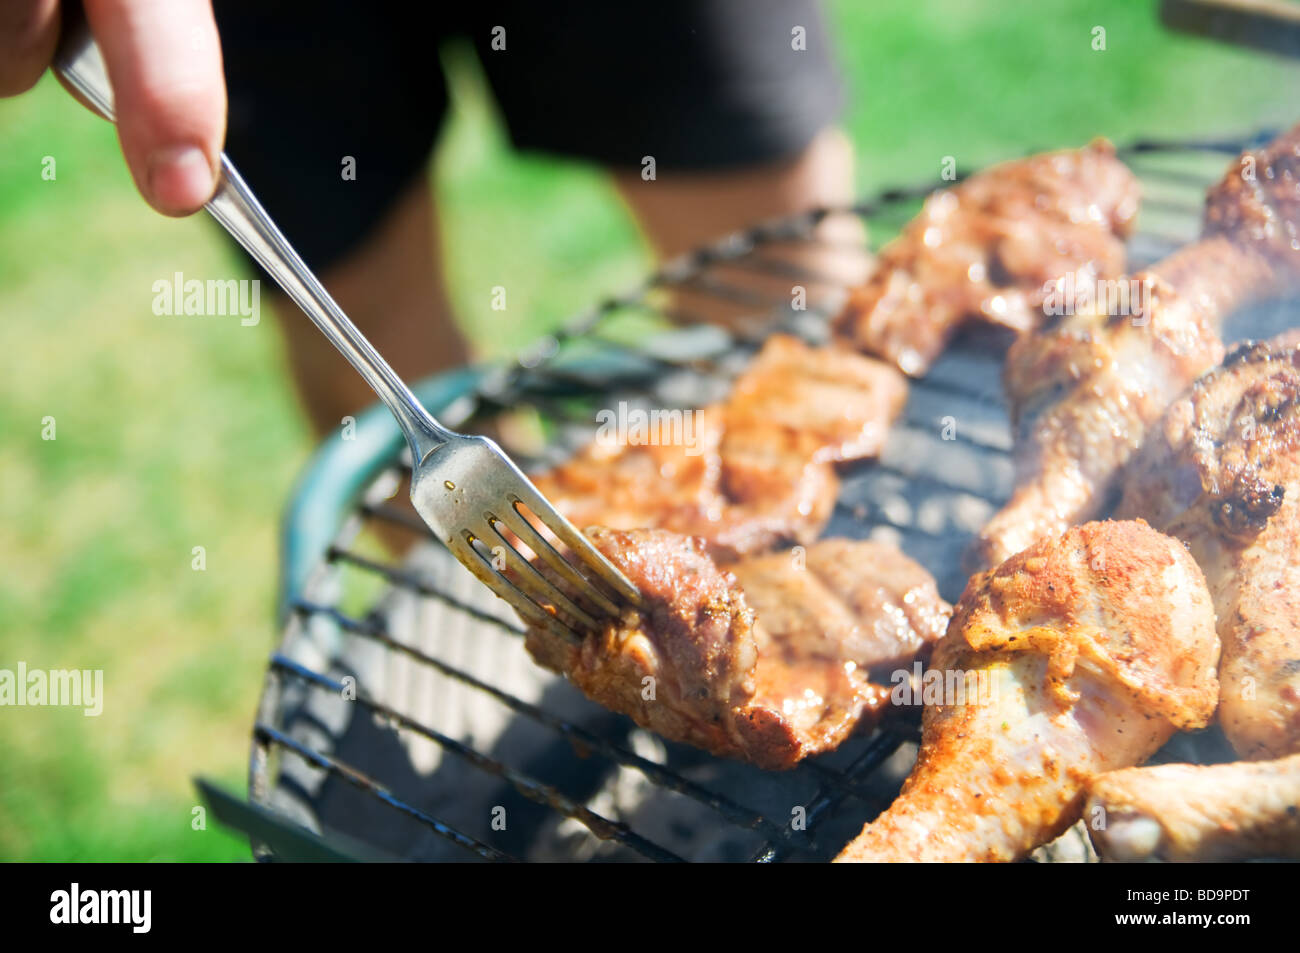 Barbecue party Stock Photo